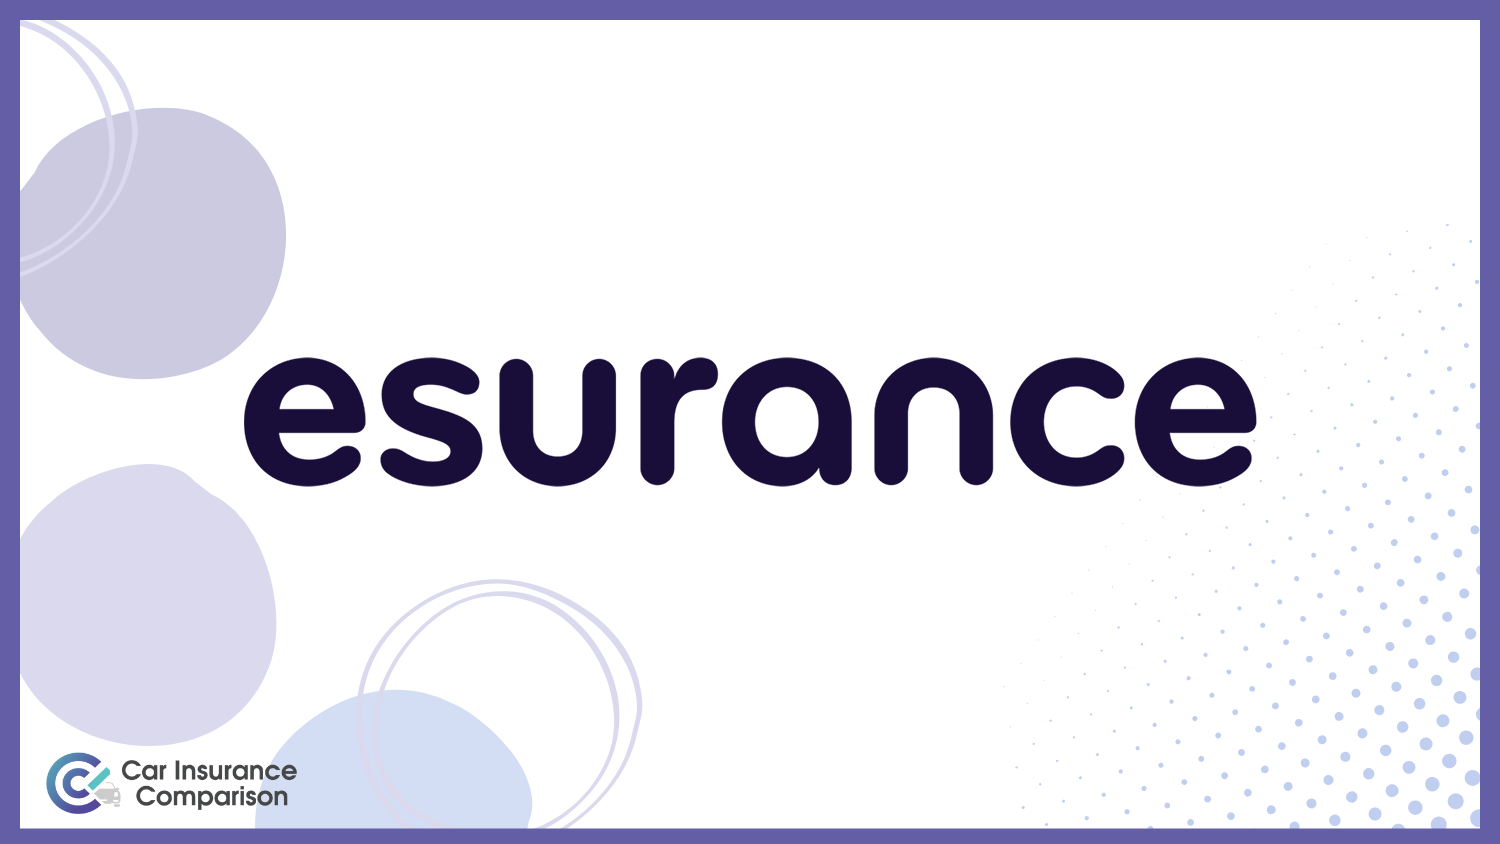 Esurance: Best Car Insurance for a Bad Driving Record